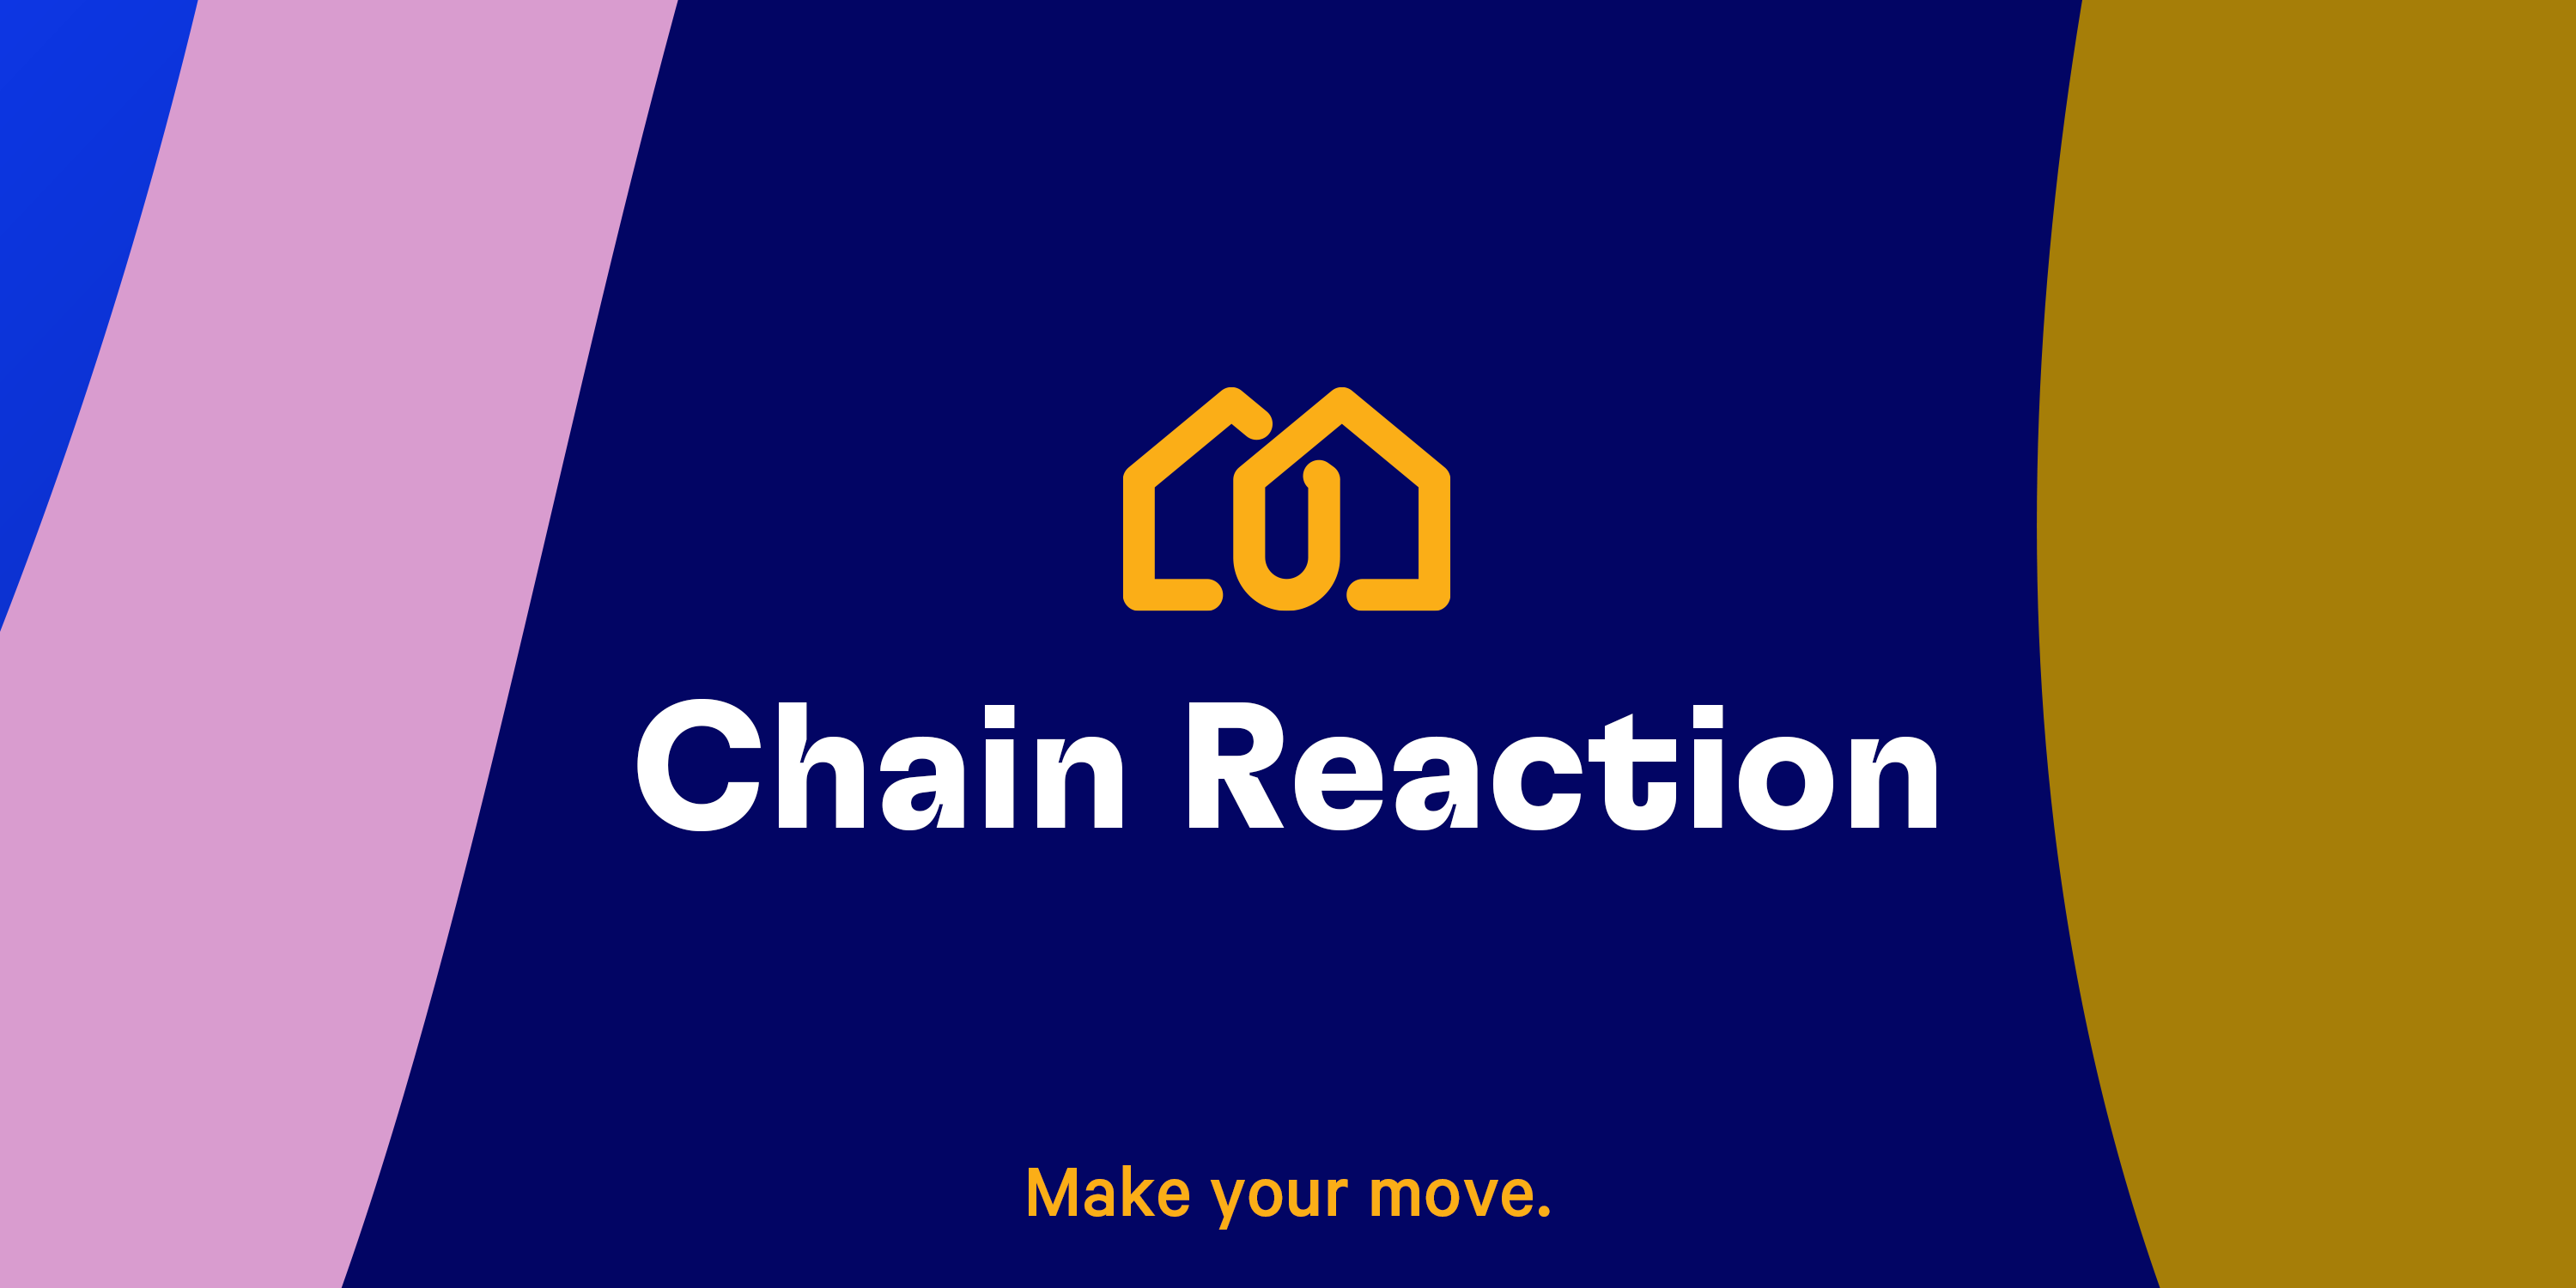 Chain Reaction. Make your move.